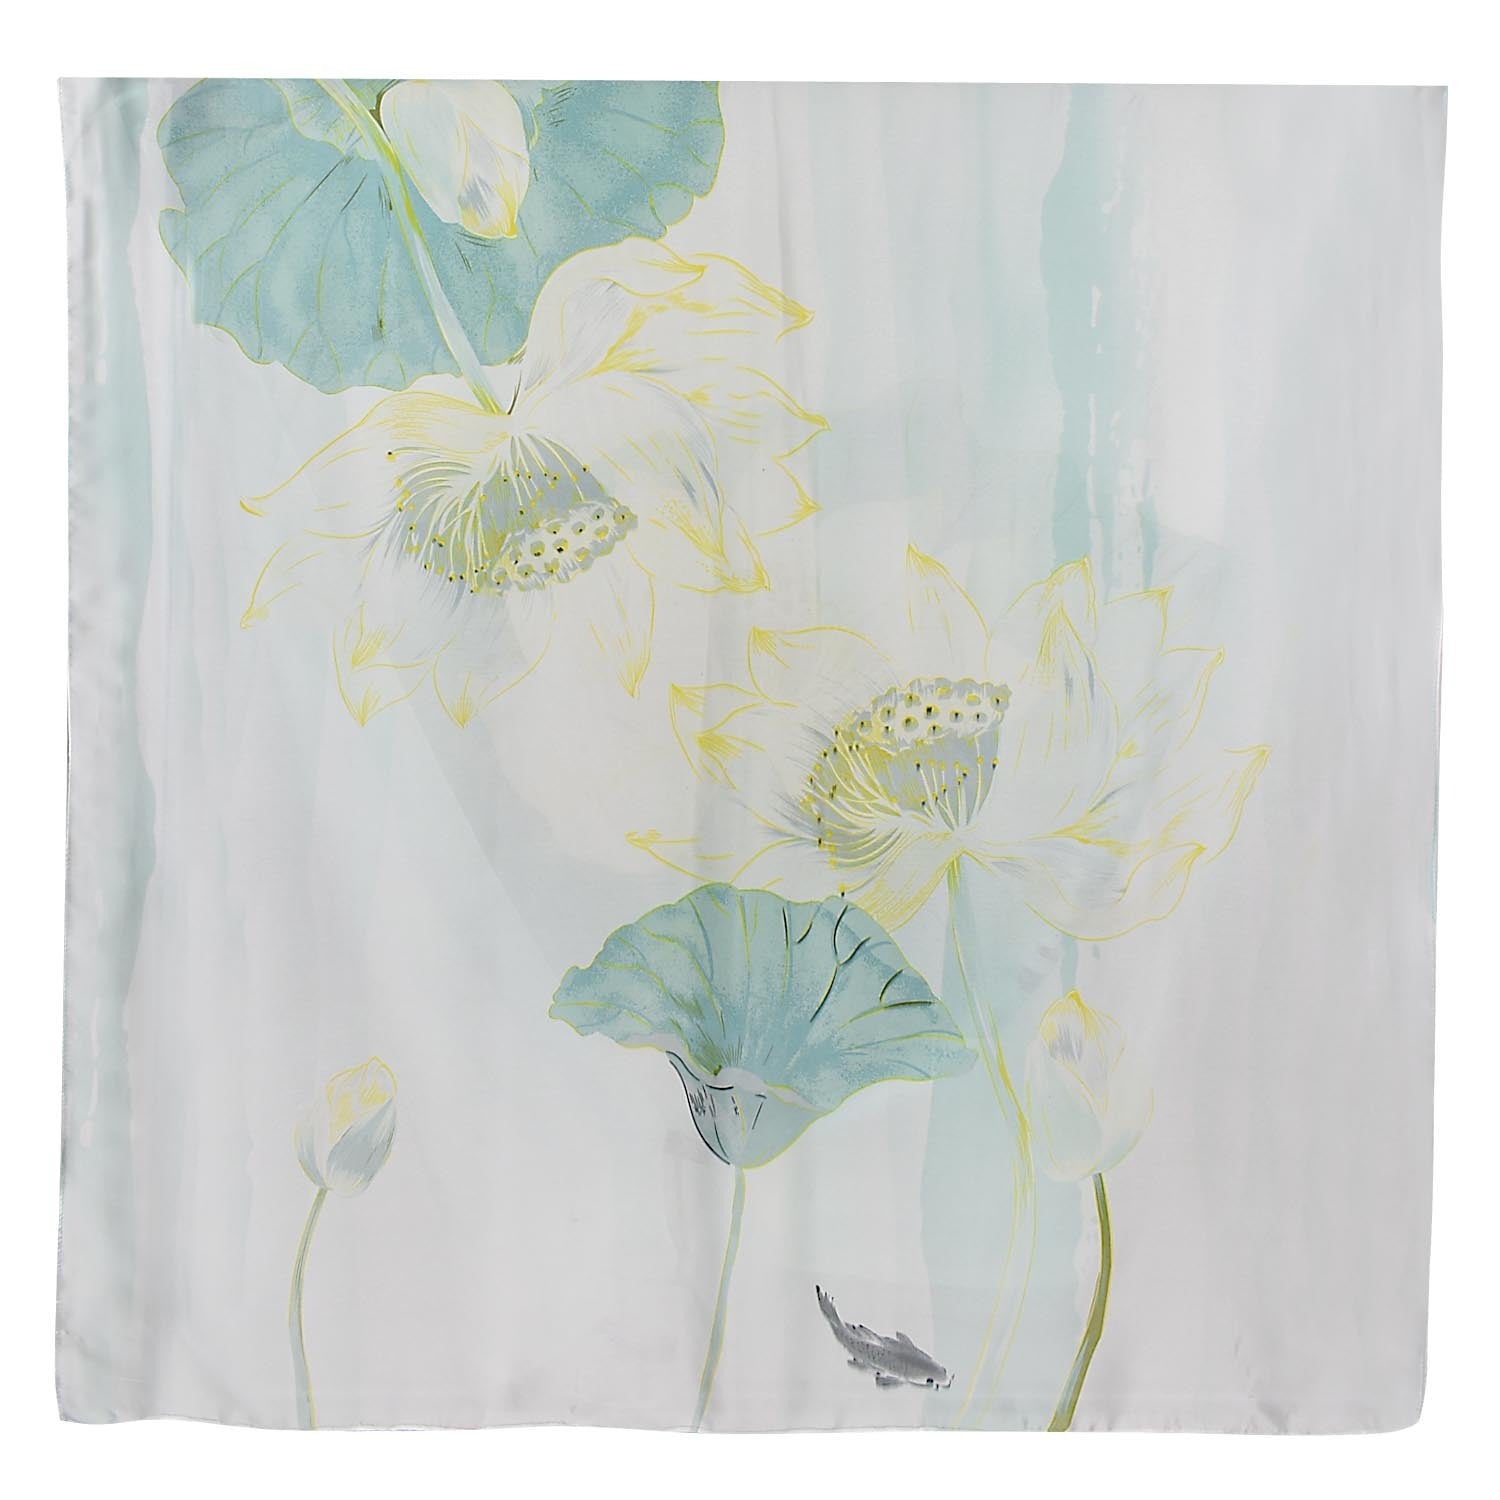 Shop Lily Pad Scarf in Light Teal - Taylor Hill Scarves